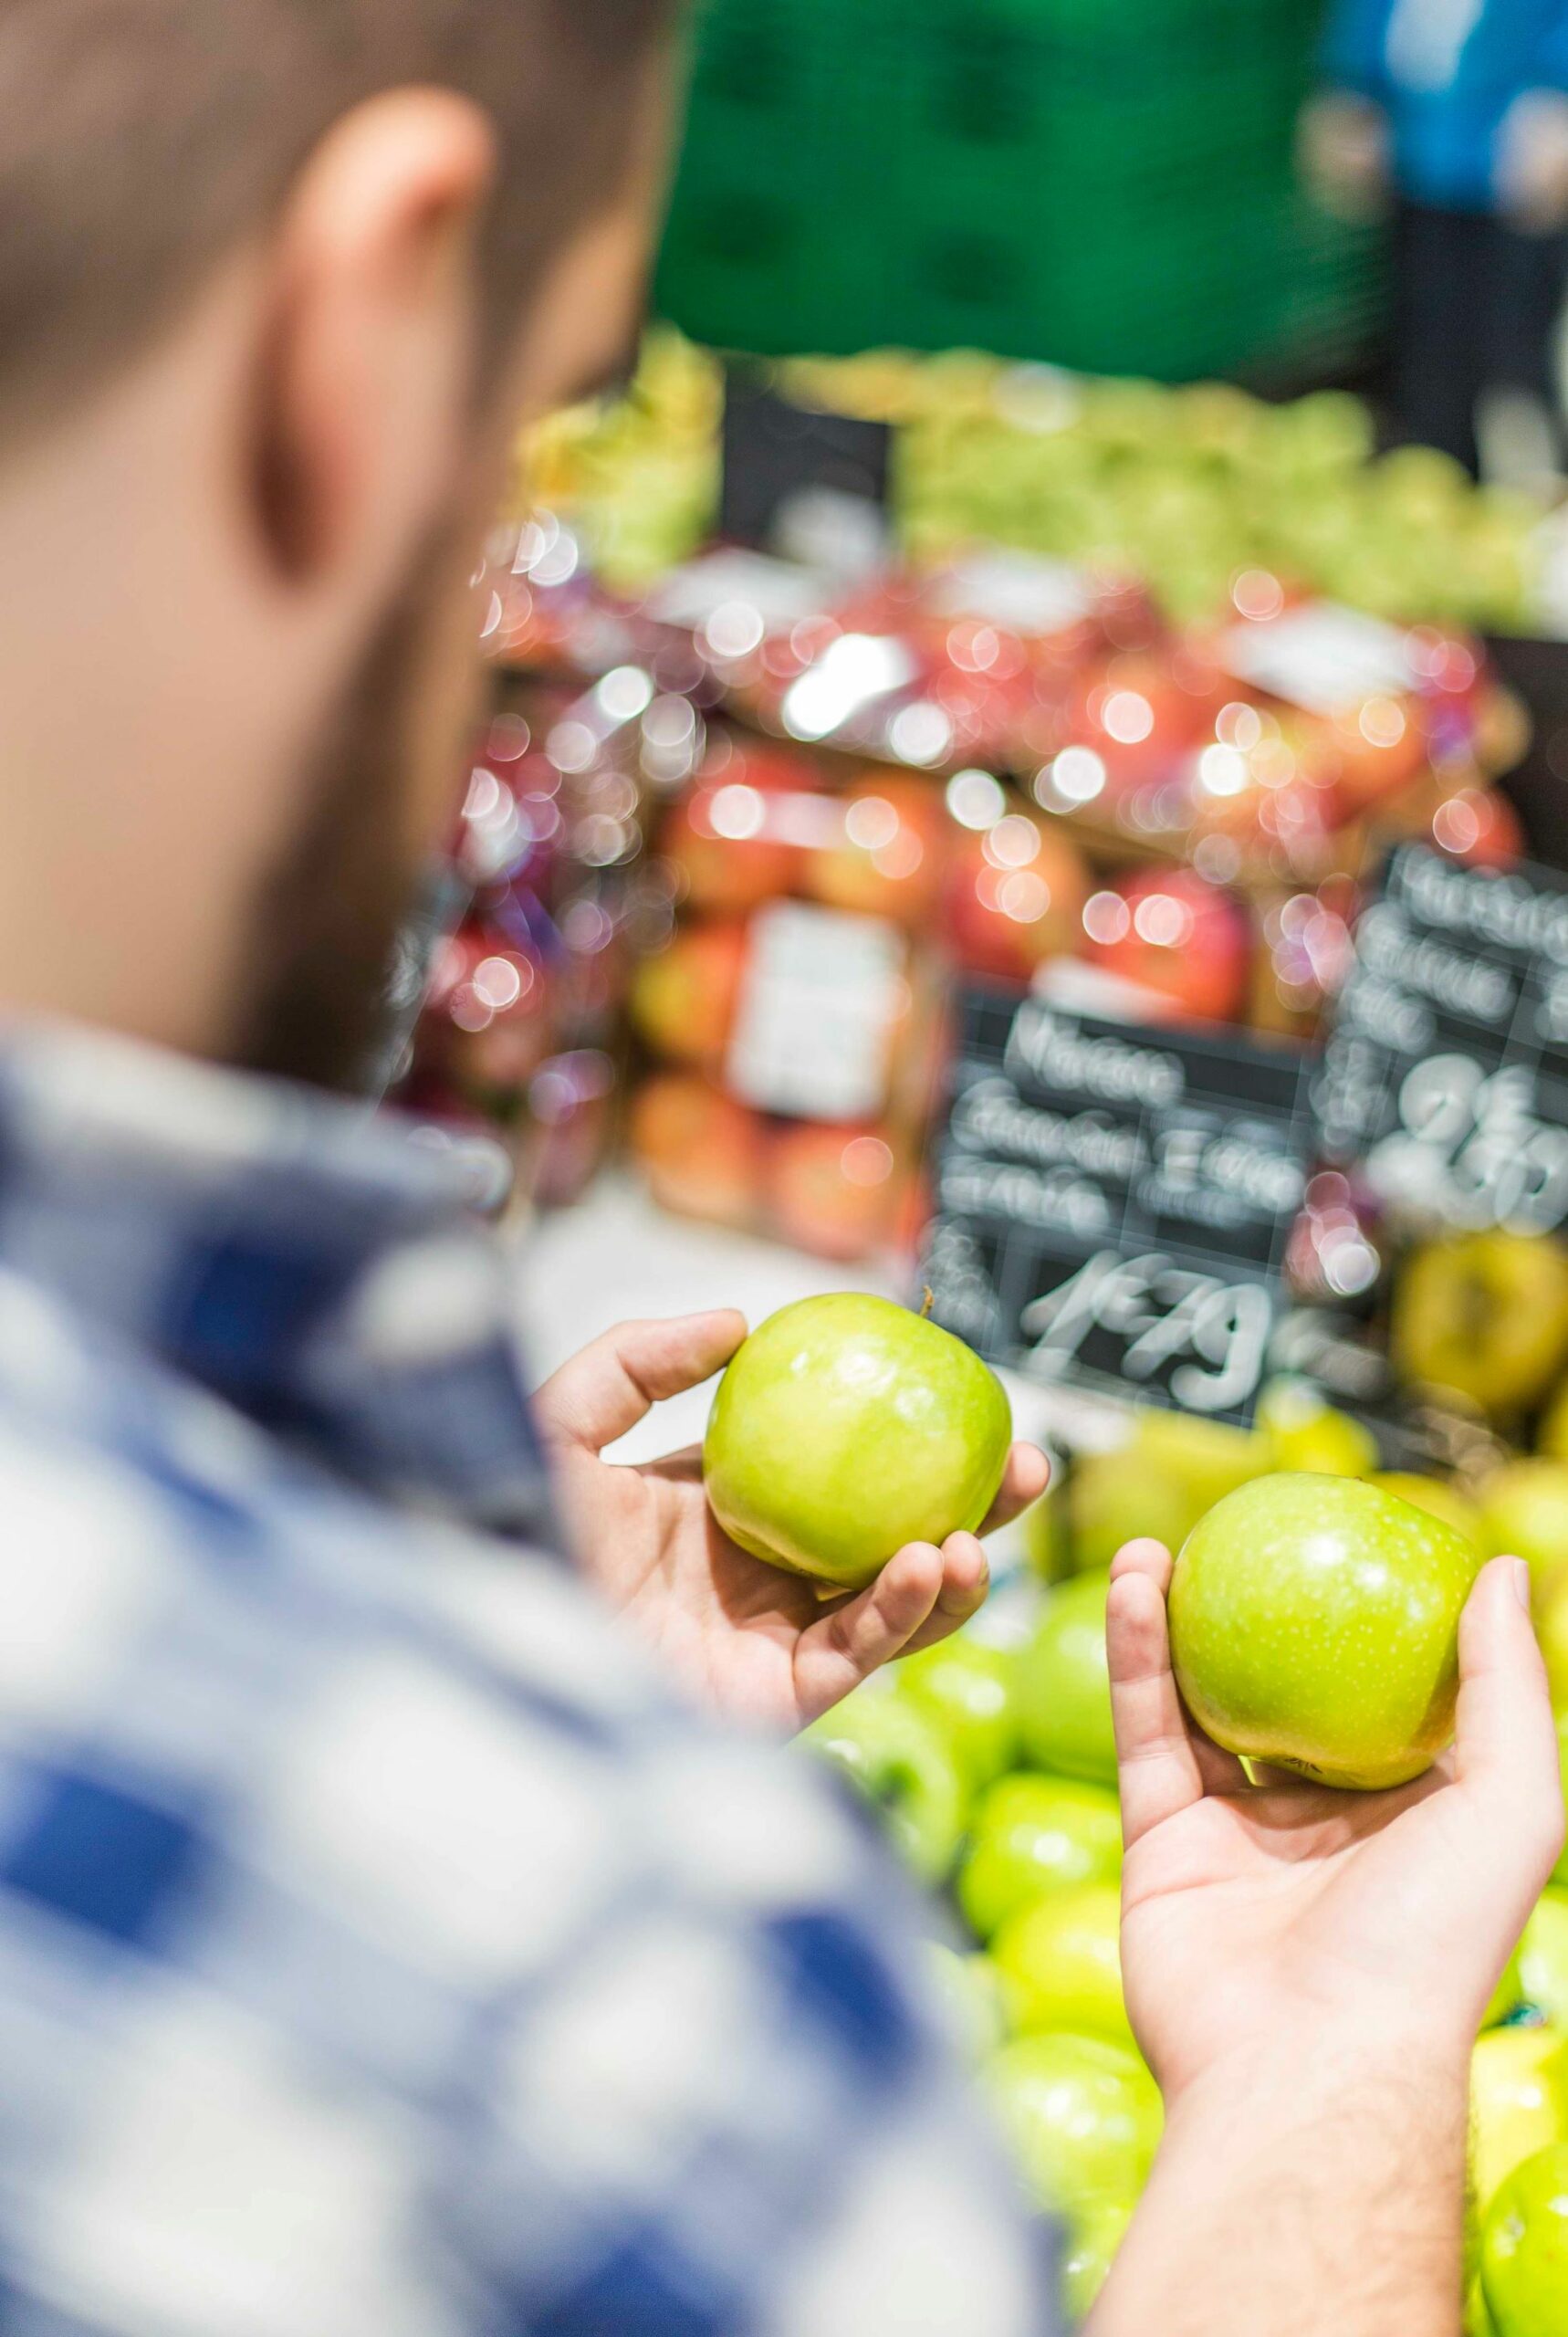 An image of a man holding apples in a grocery store.